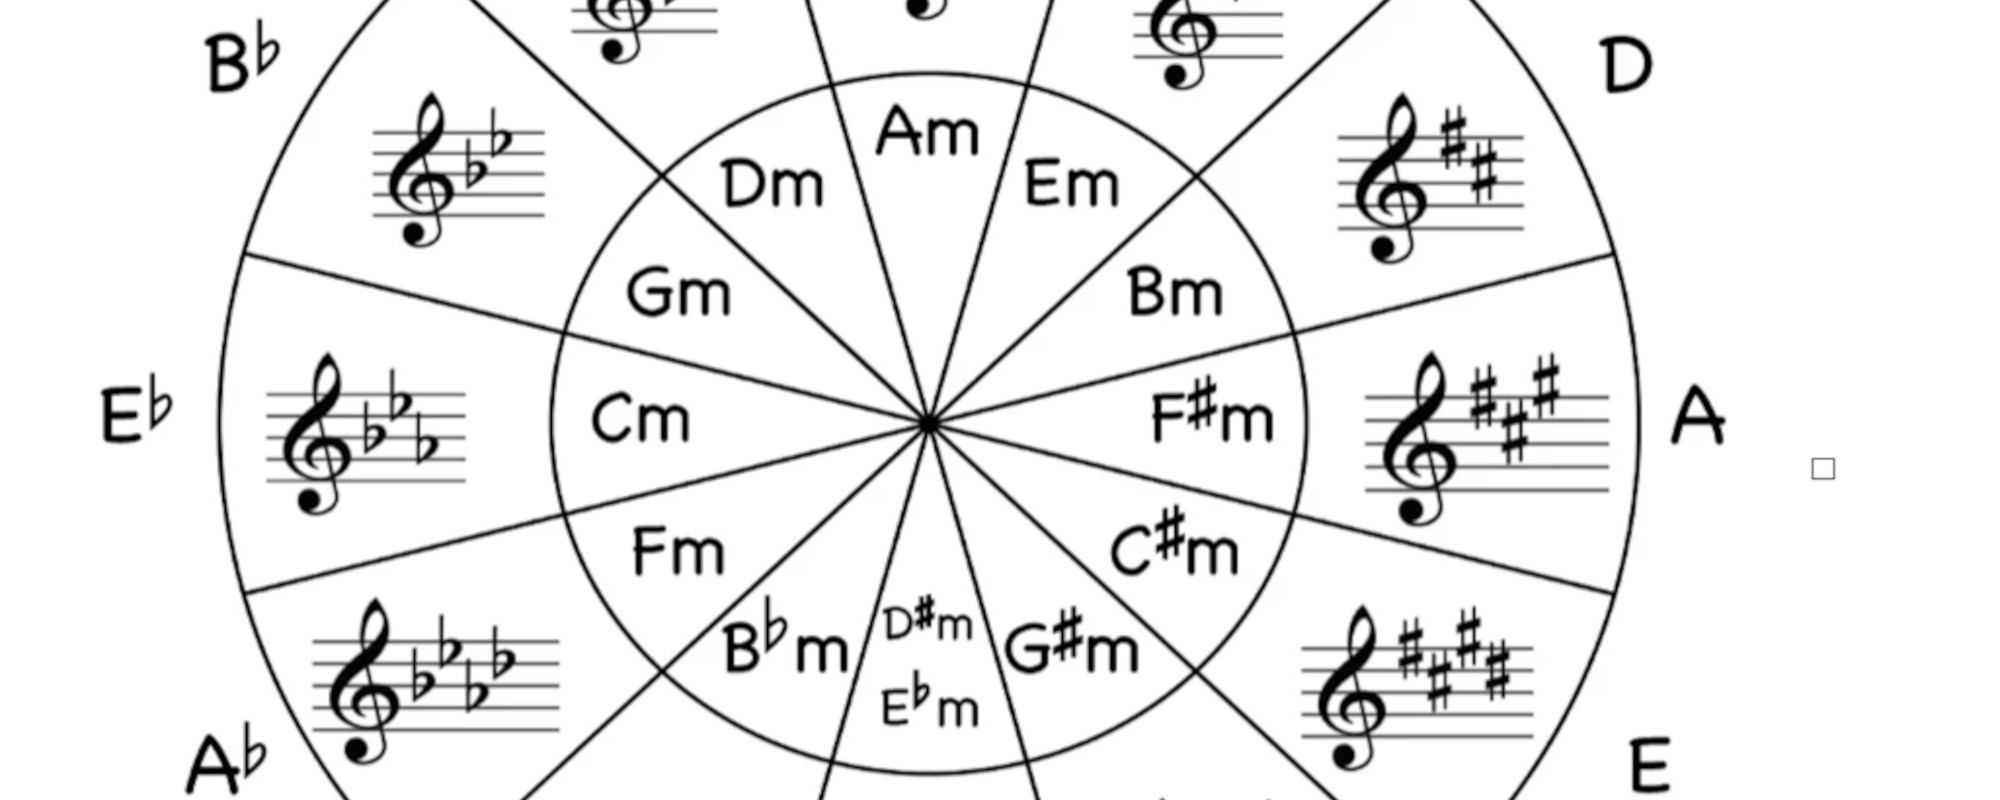 Songwriter U: Songwriting Tips with the Circle of Fifths